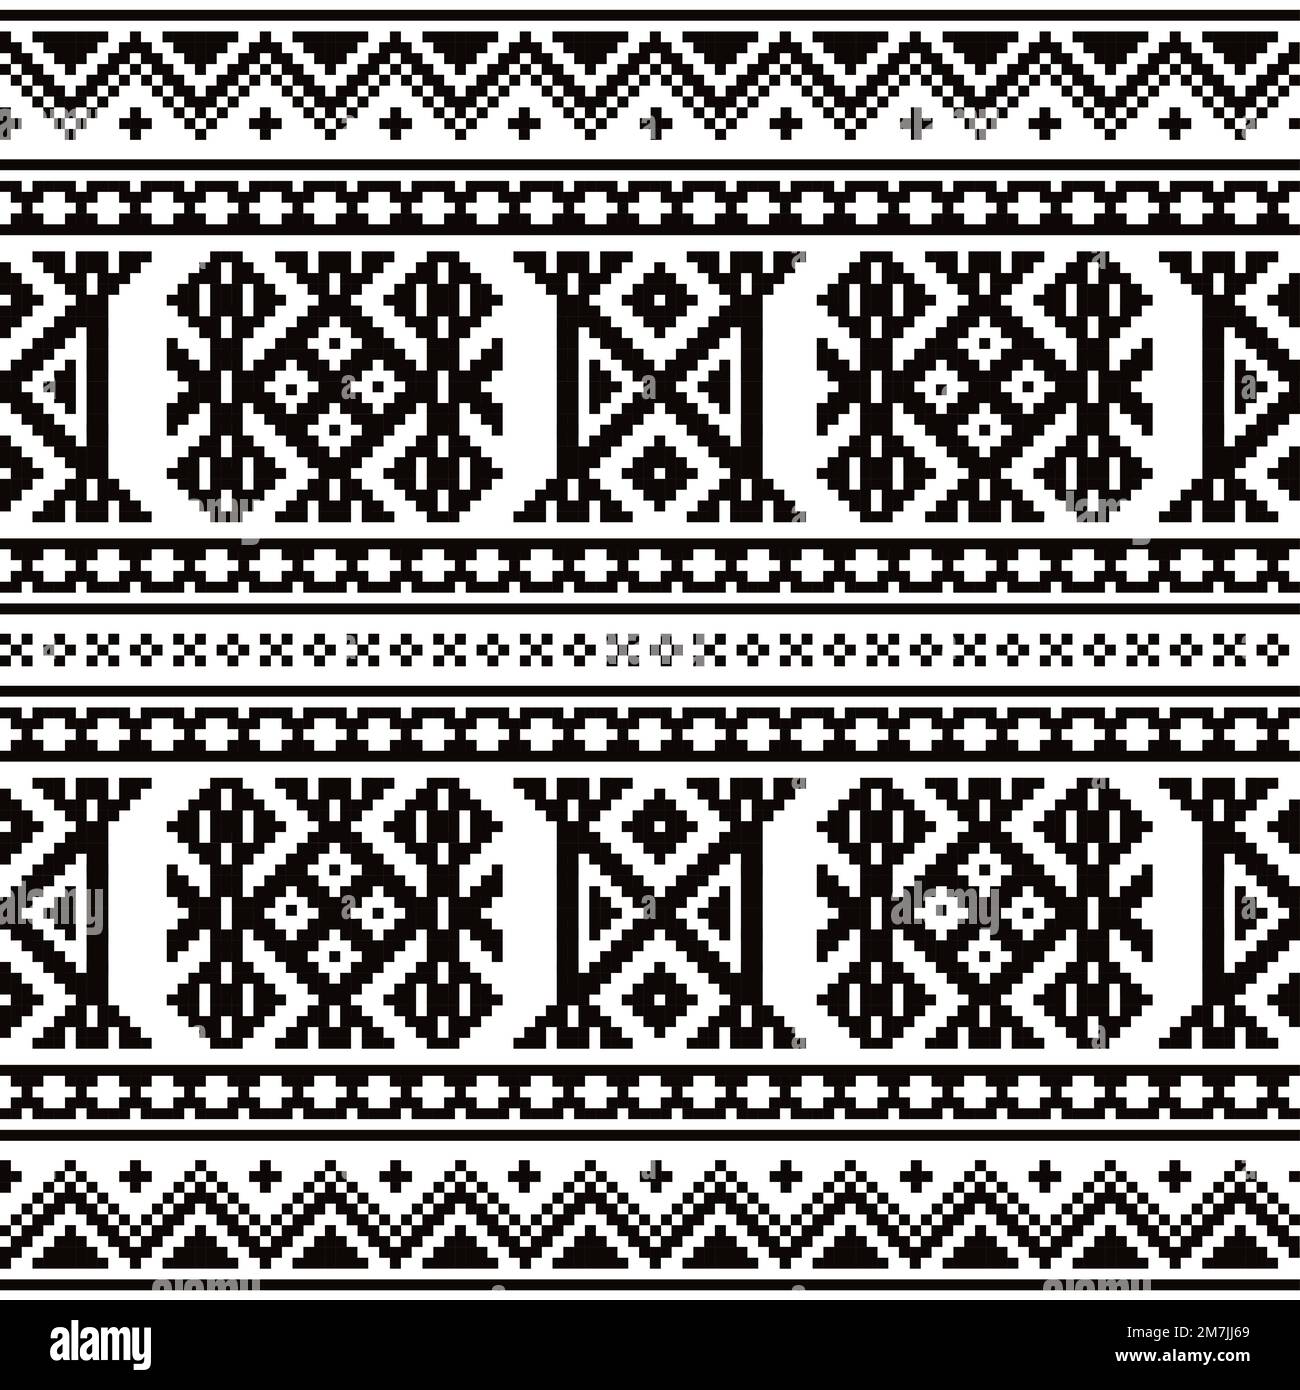 Sami folk art vector seamless pattern, retro design styled as traditional cross-stitch ornament from Lapland in black and white Stock Vector